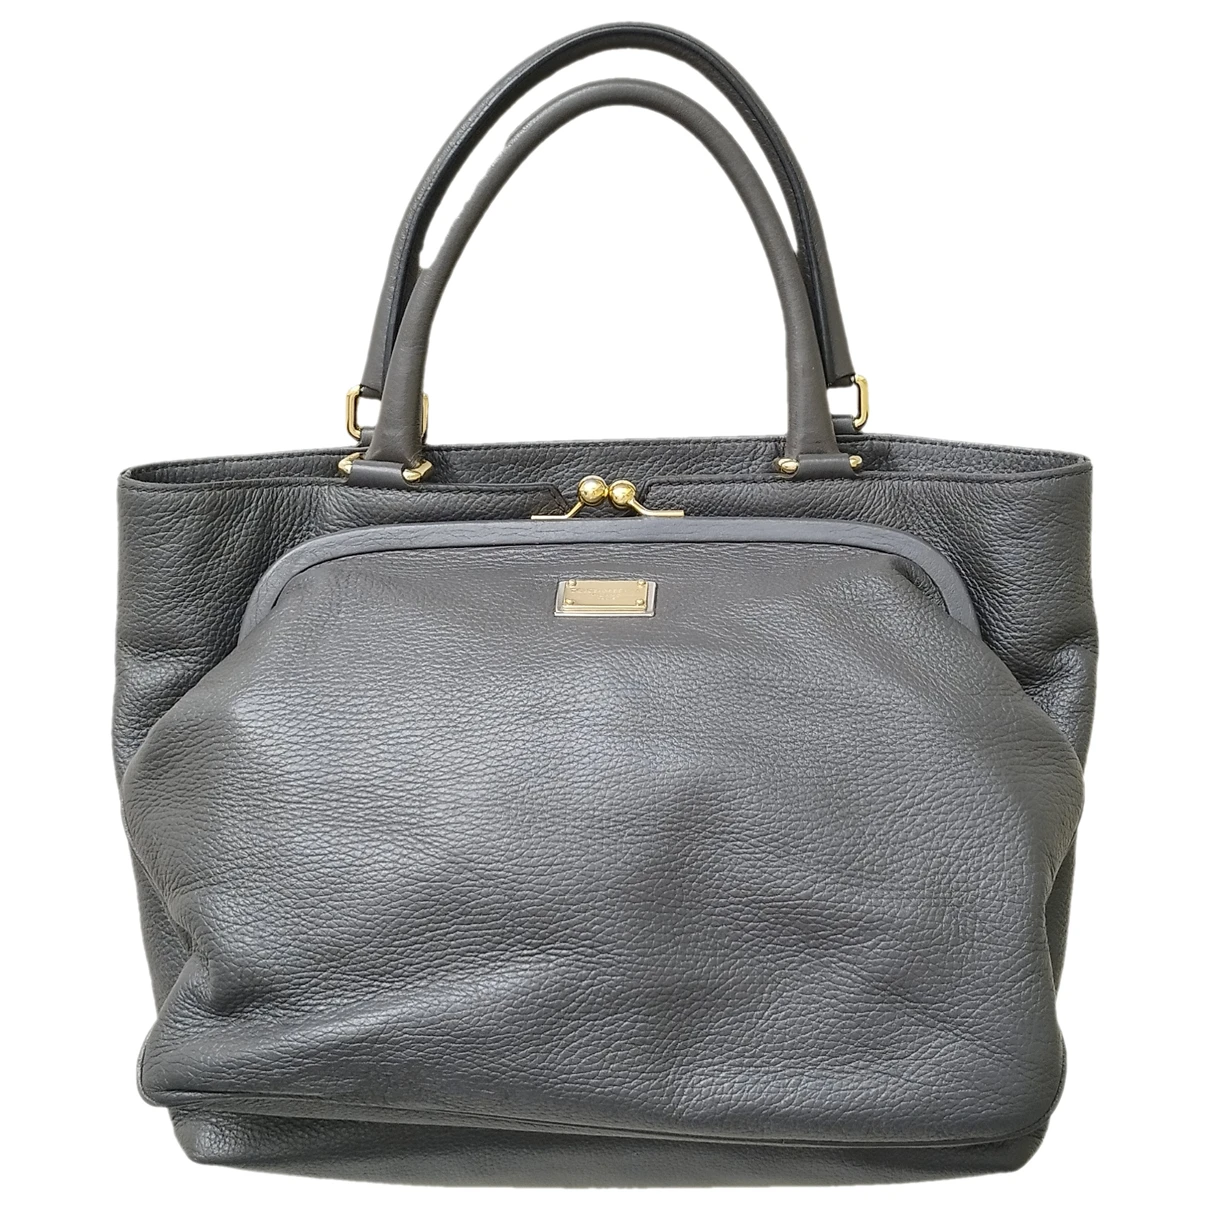 Pre-owned Dolce & Gabbana Leather Tote In Brown